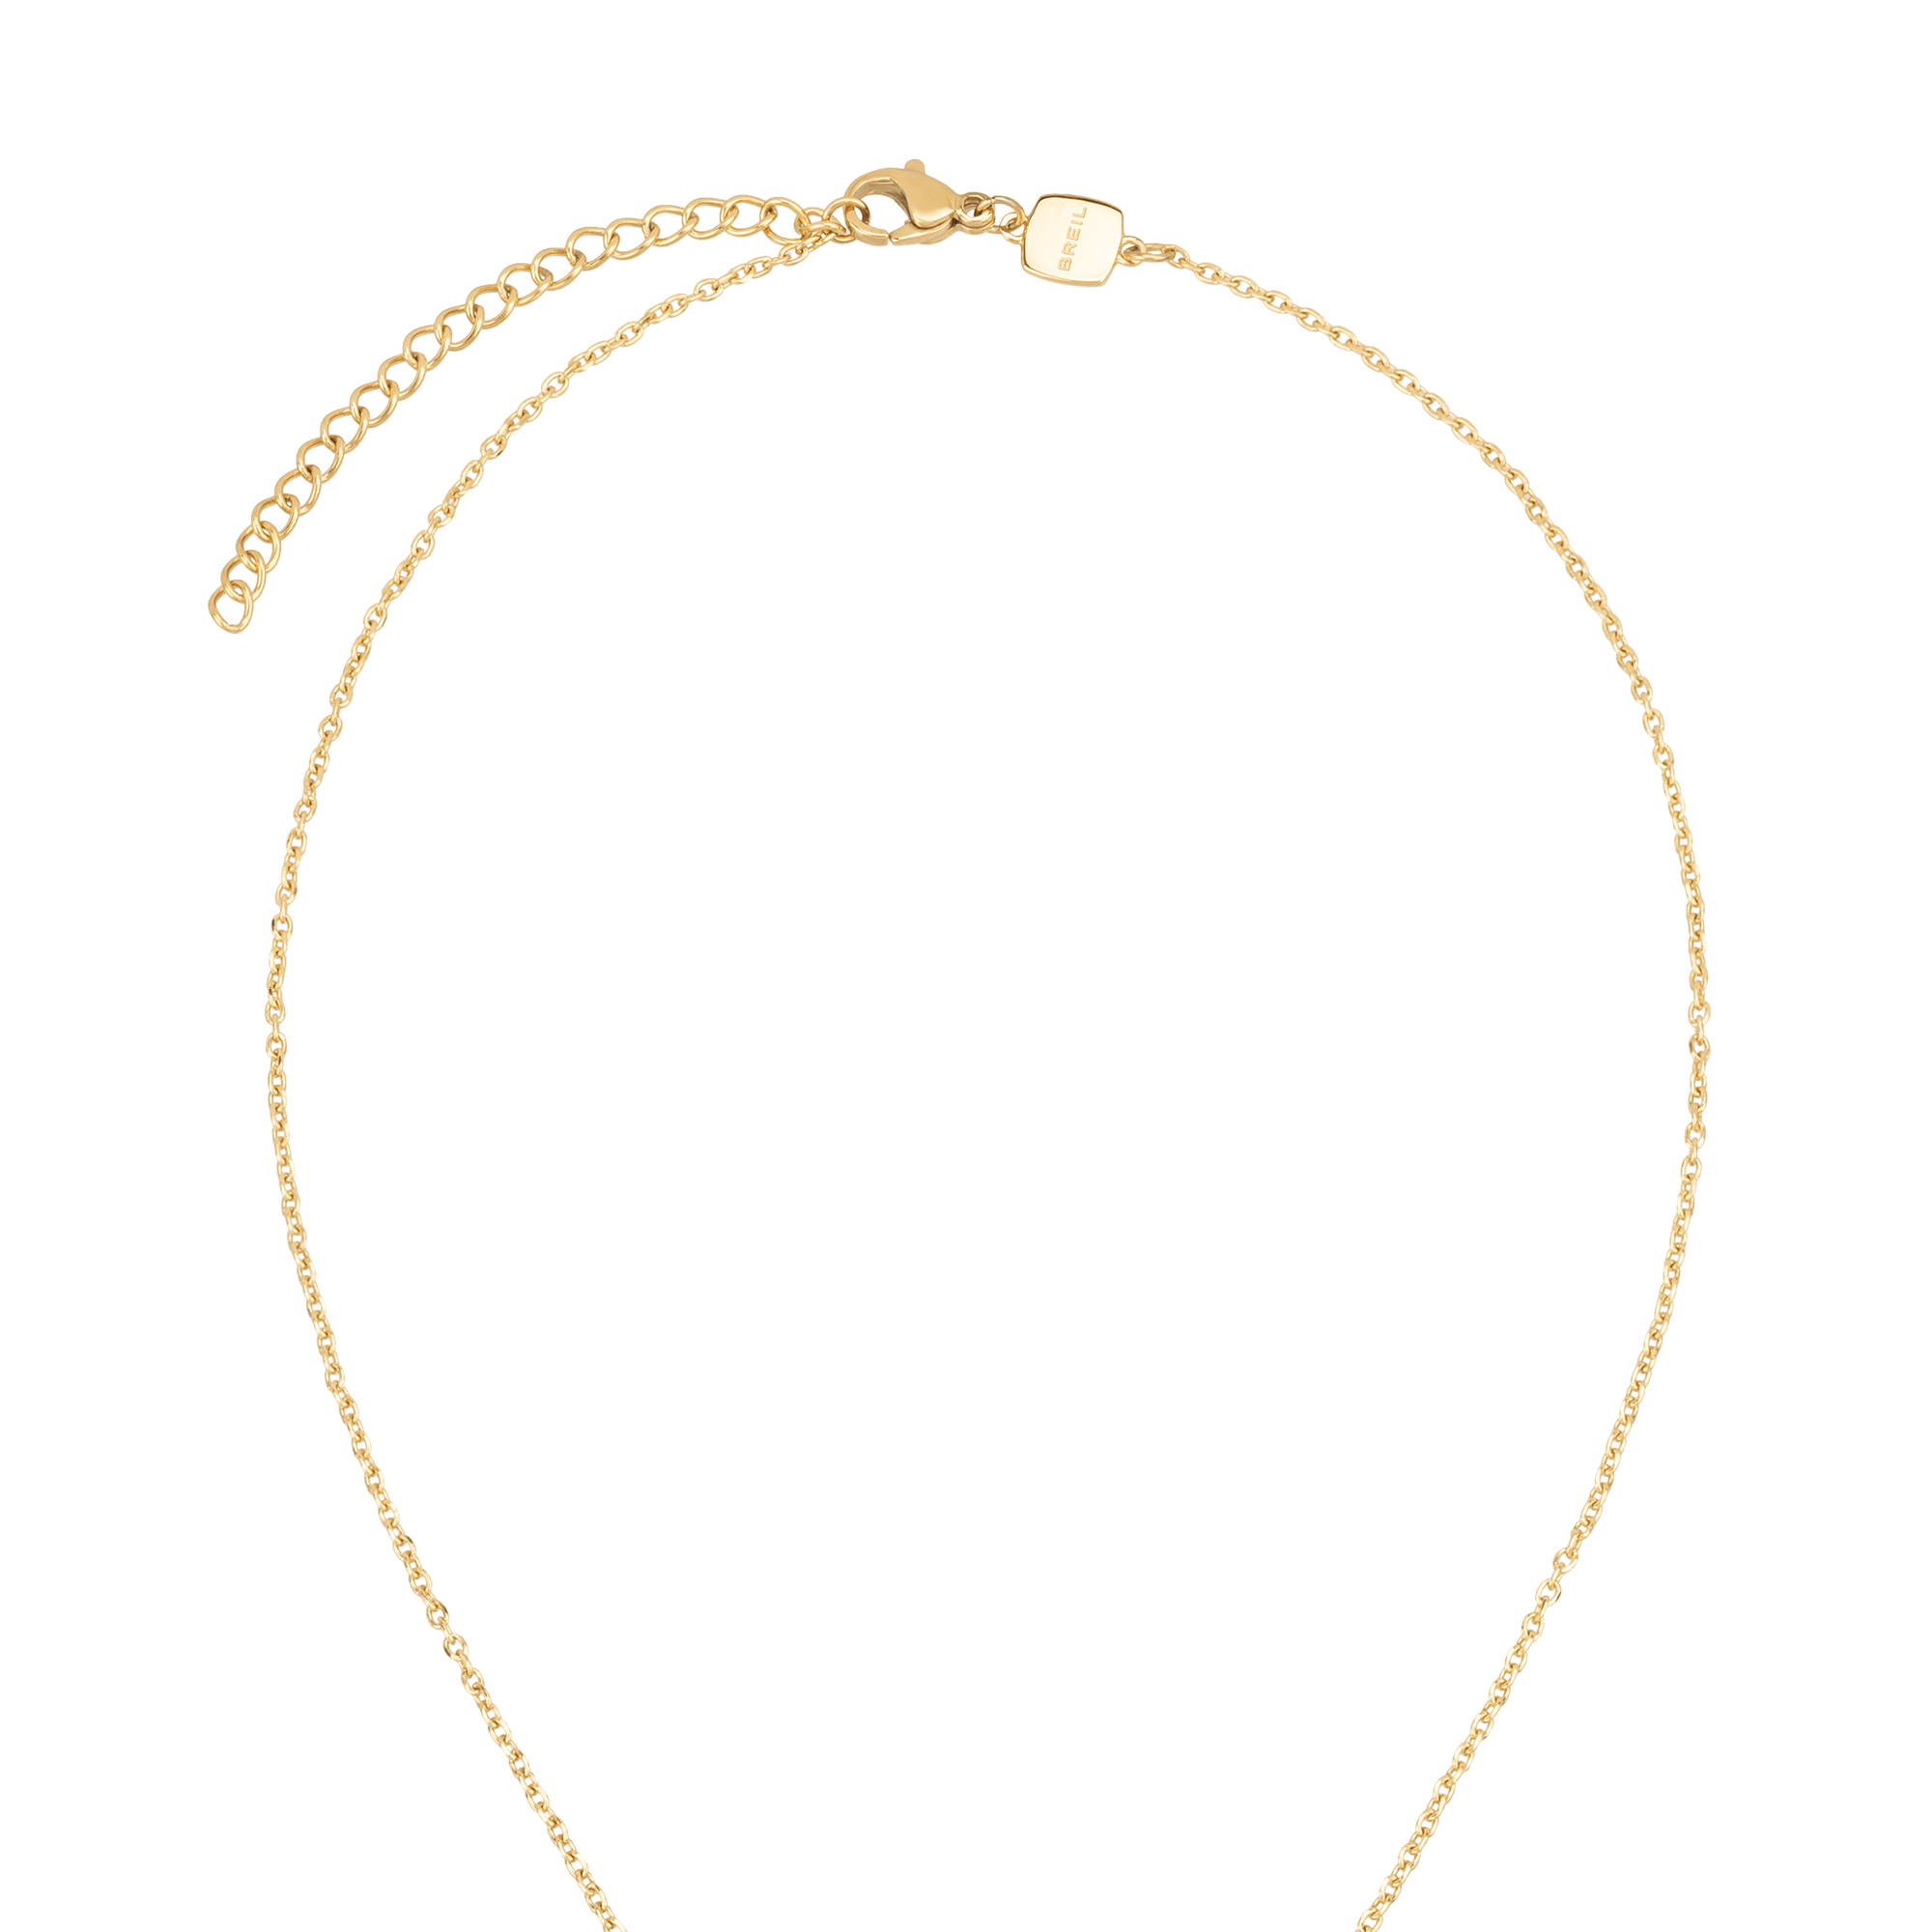 NEW TETRA - IP GOLD STEEL NECKLACE WITH MICRO-CHAIN AND PENDANTS - 3 - TJ3166 | Breil